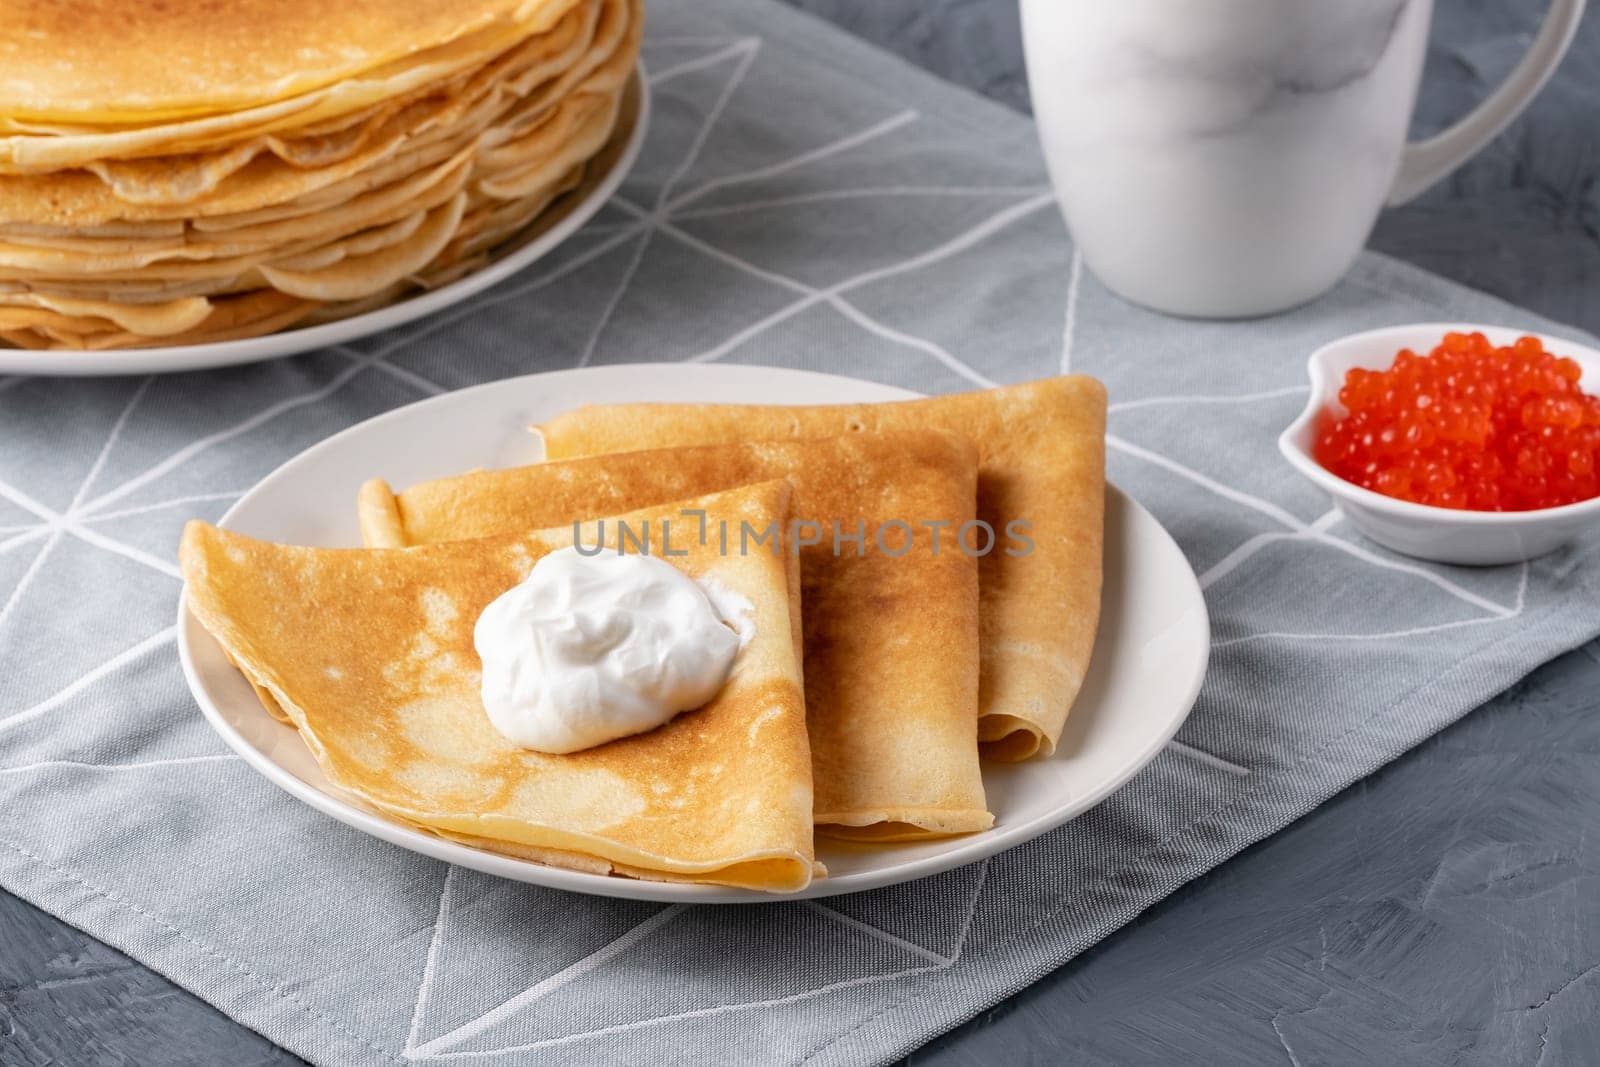 Pancakes with sour cream and red caviar. Close-up of pancakes stacked in a plate on a gray background.